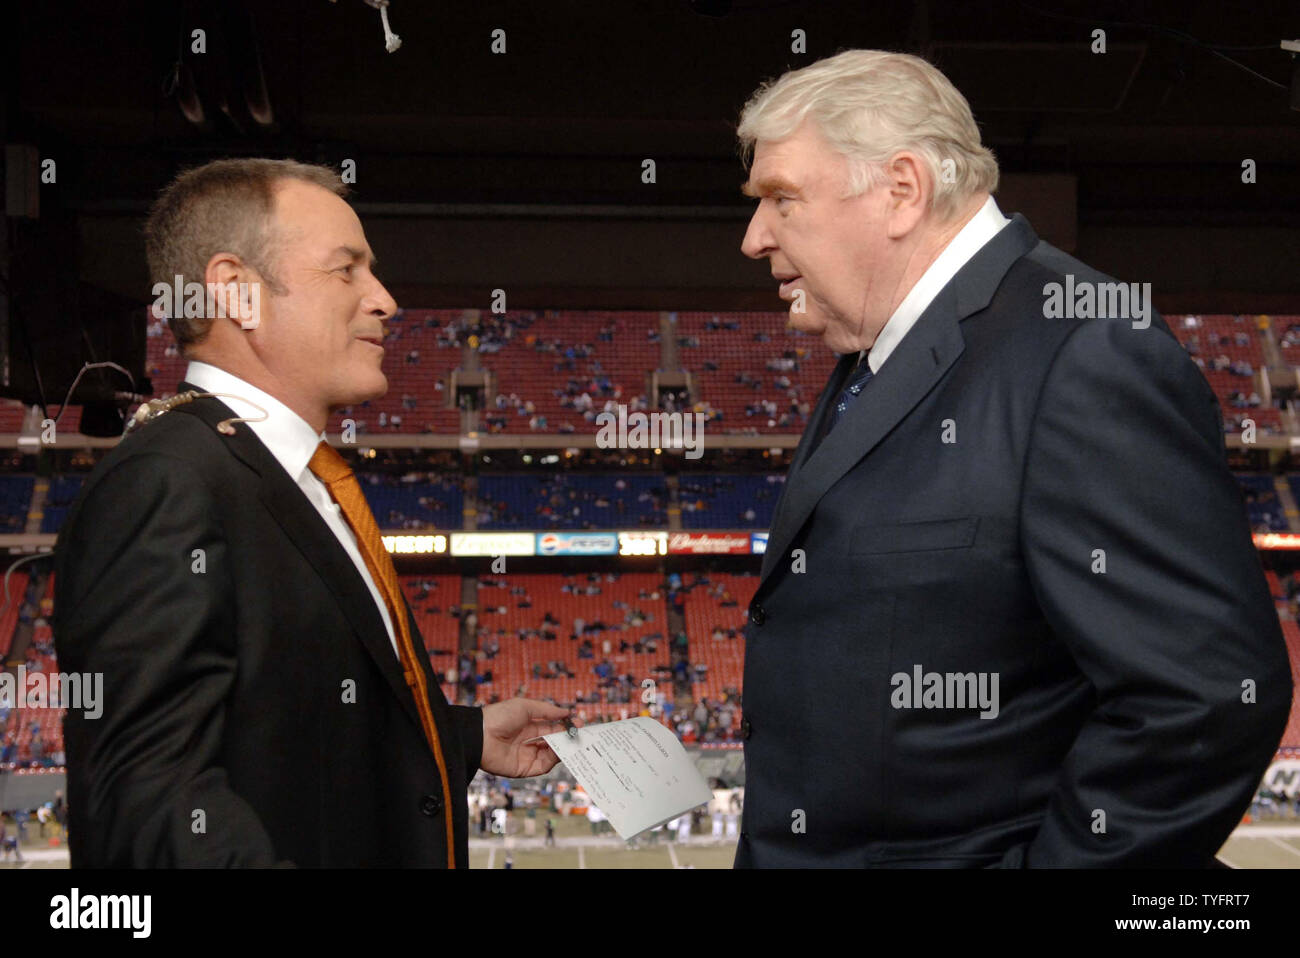 John Madden and Al Michaels exchange words during there last broadcast of ABC's Monday Night Football at Giants Stadium in East Rutherford, New Jersey on December 26, 2005. The New England Patriots defeated the New York Jets 21-7.  (UPI Photo/ Ida Mae Astute/ Pool) Stock Photo